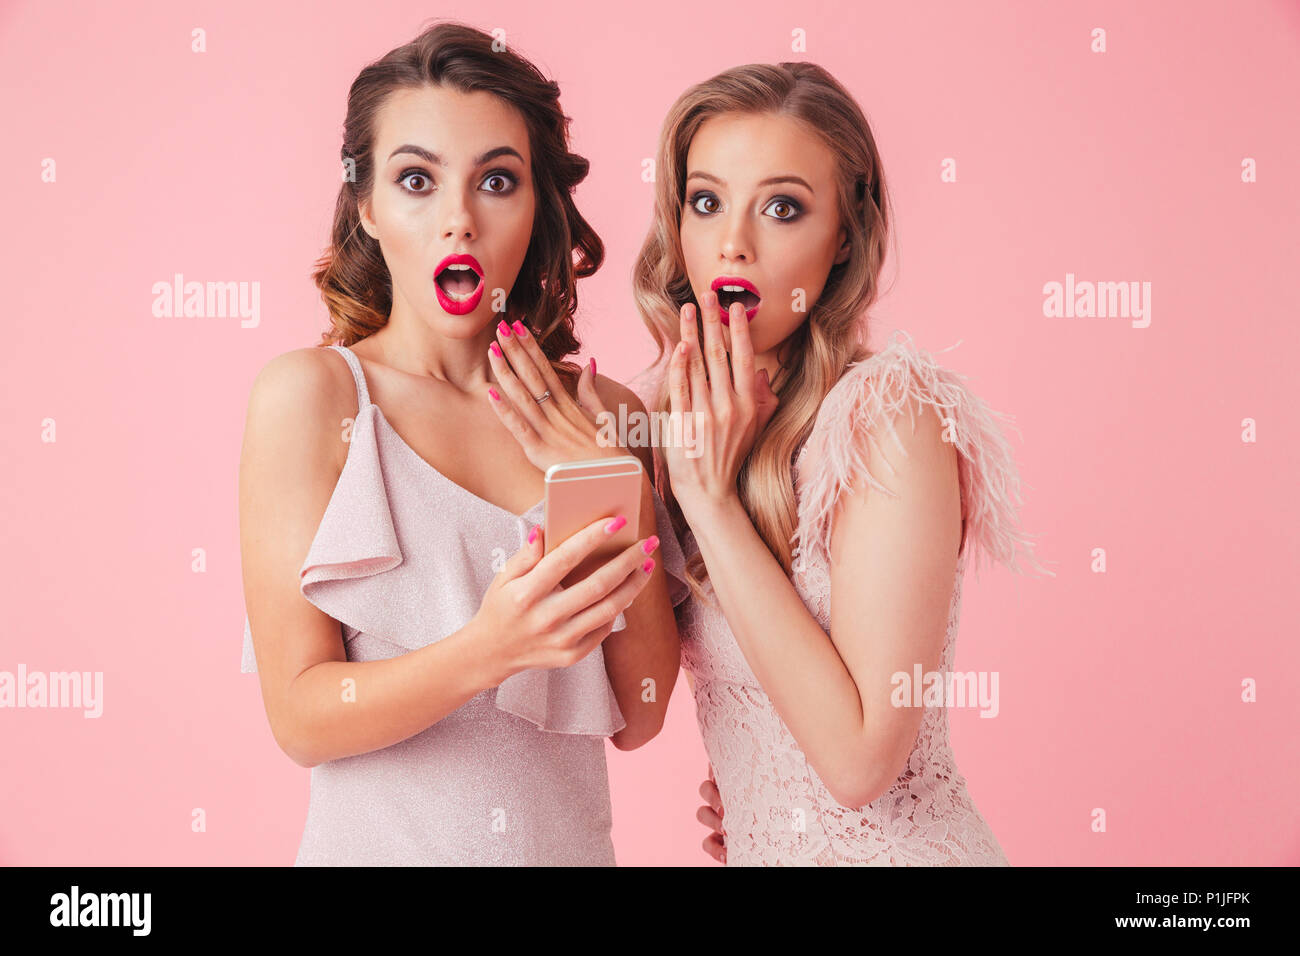 Two shocked elegant women in dresses covering their mouths while using smartphone and looking at the camera over pink background Stock Photo